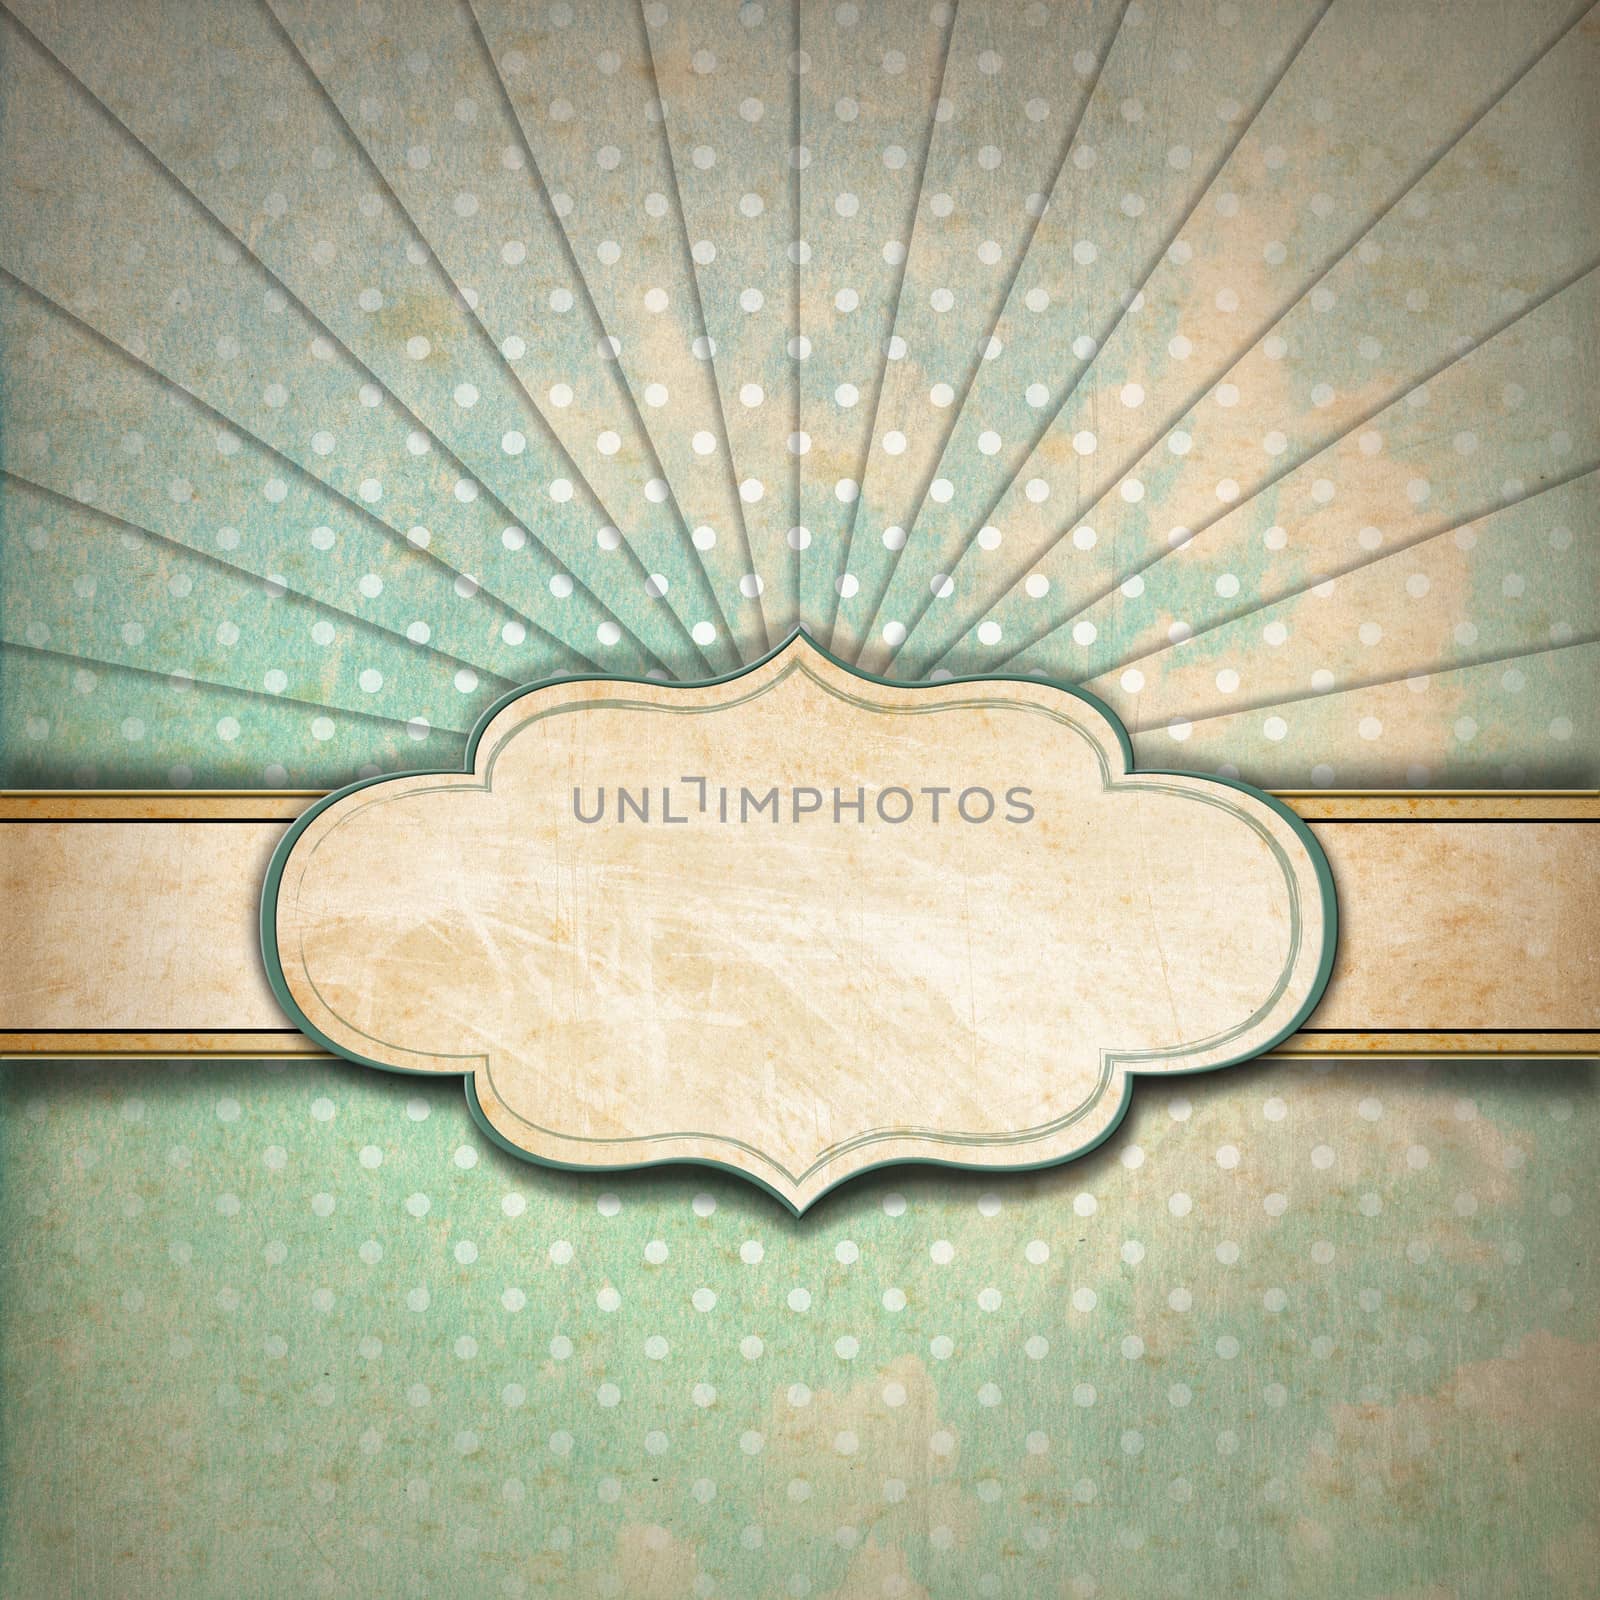 Vintage background with green, blue and brown pastel colors, sunbeams stripes and blank label